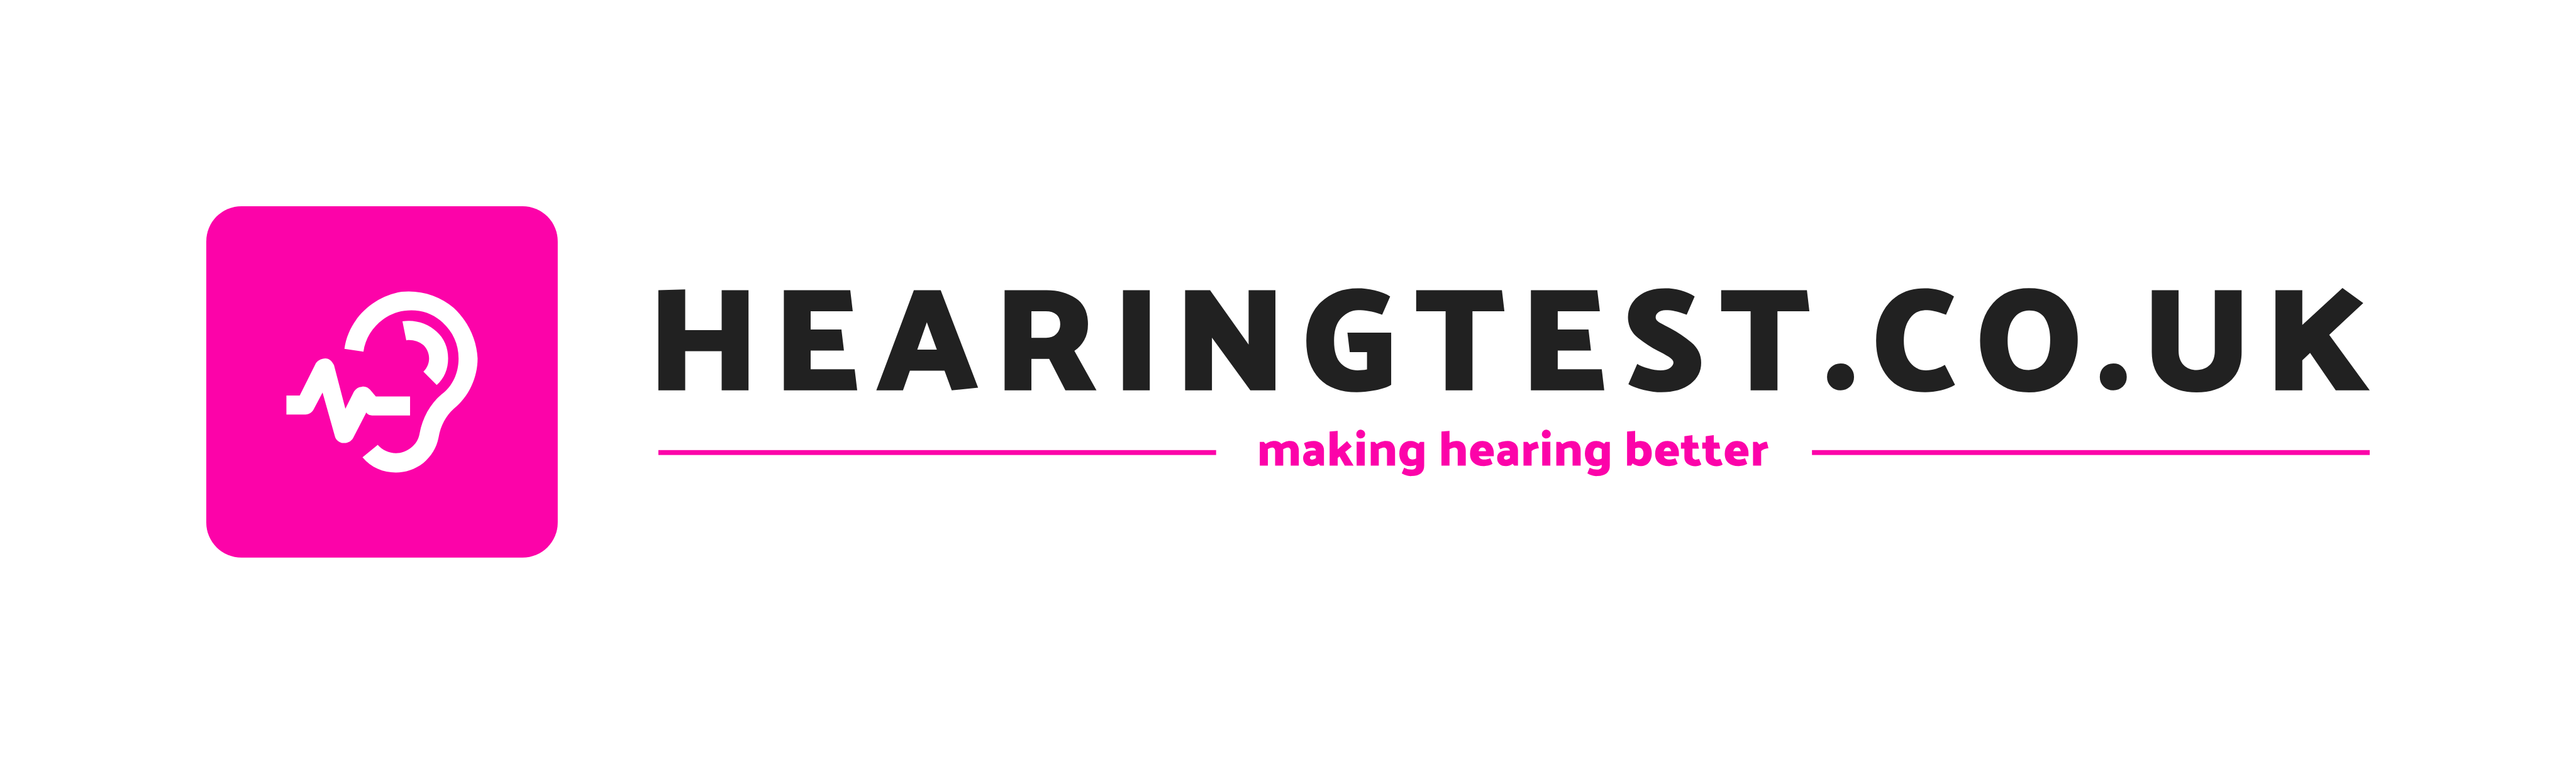 Free Hearing Test for Young Adults and Teenagers | Hearingtest.co.uk